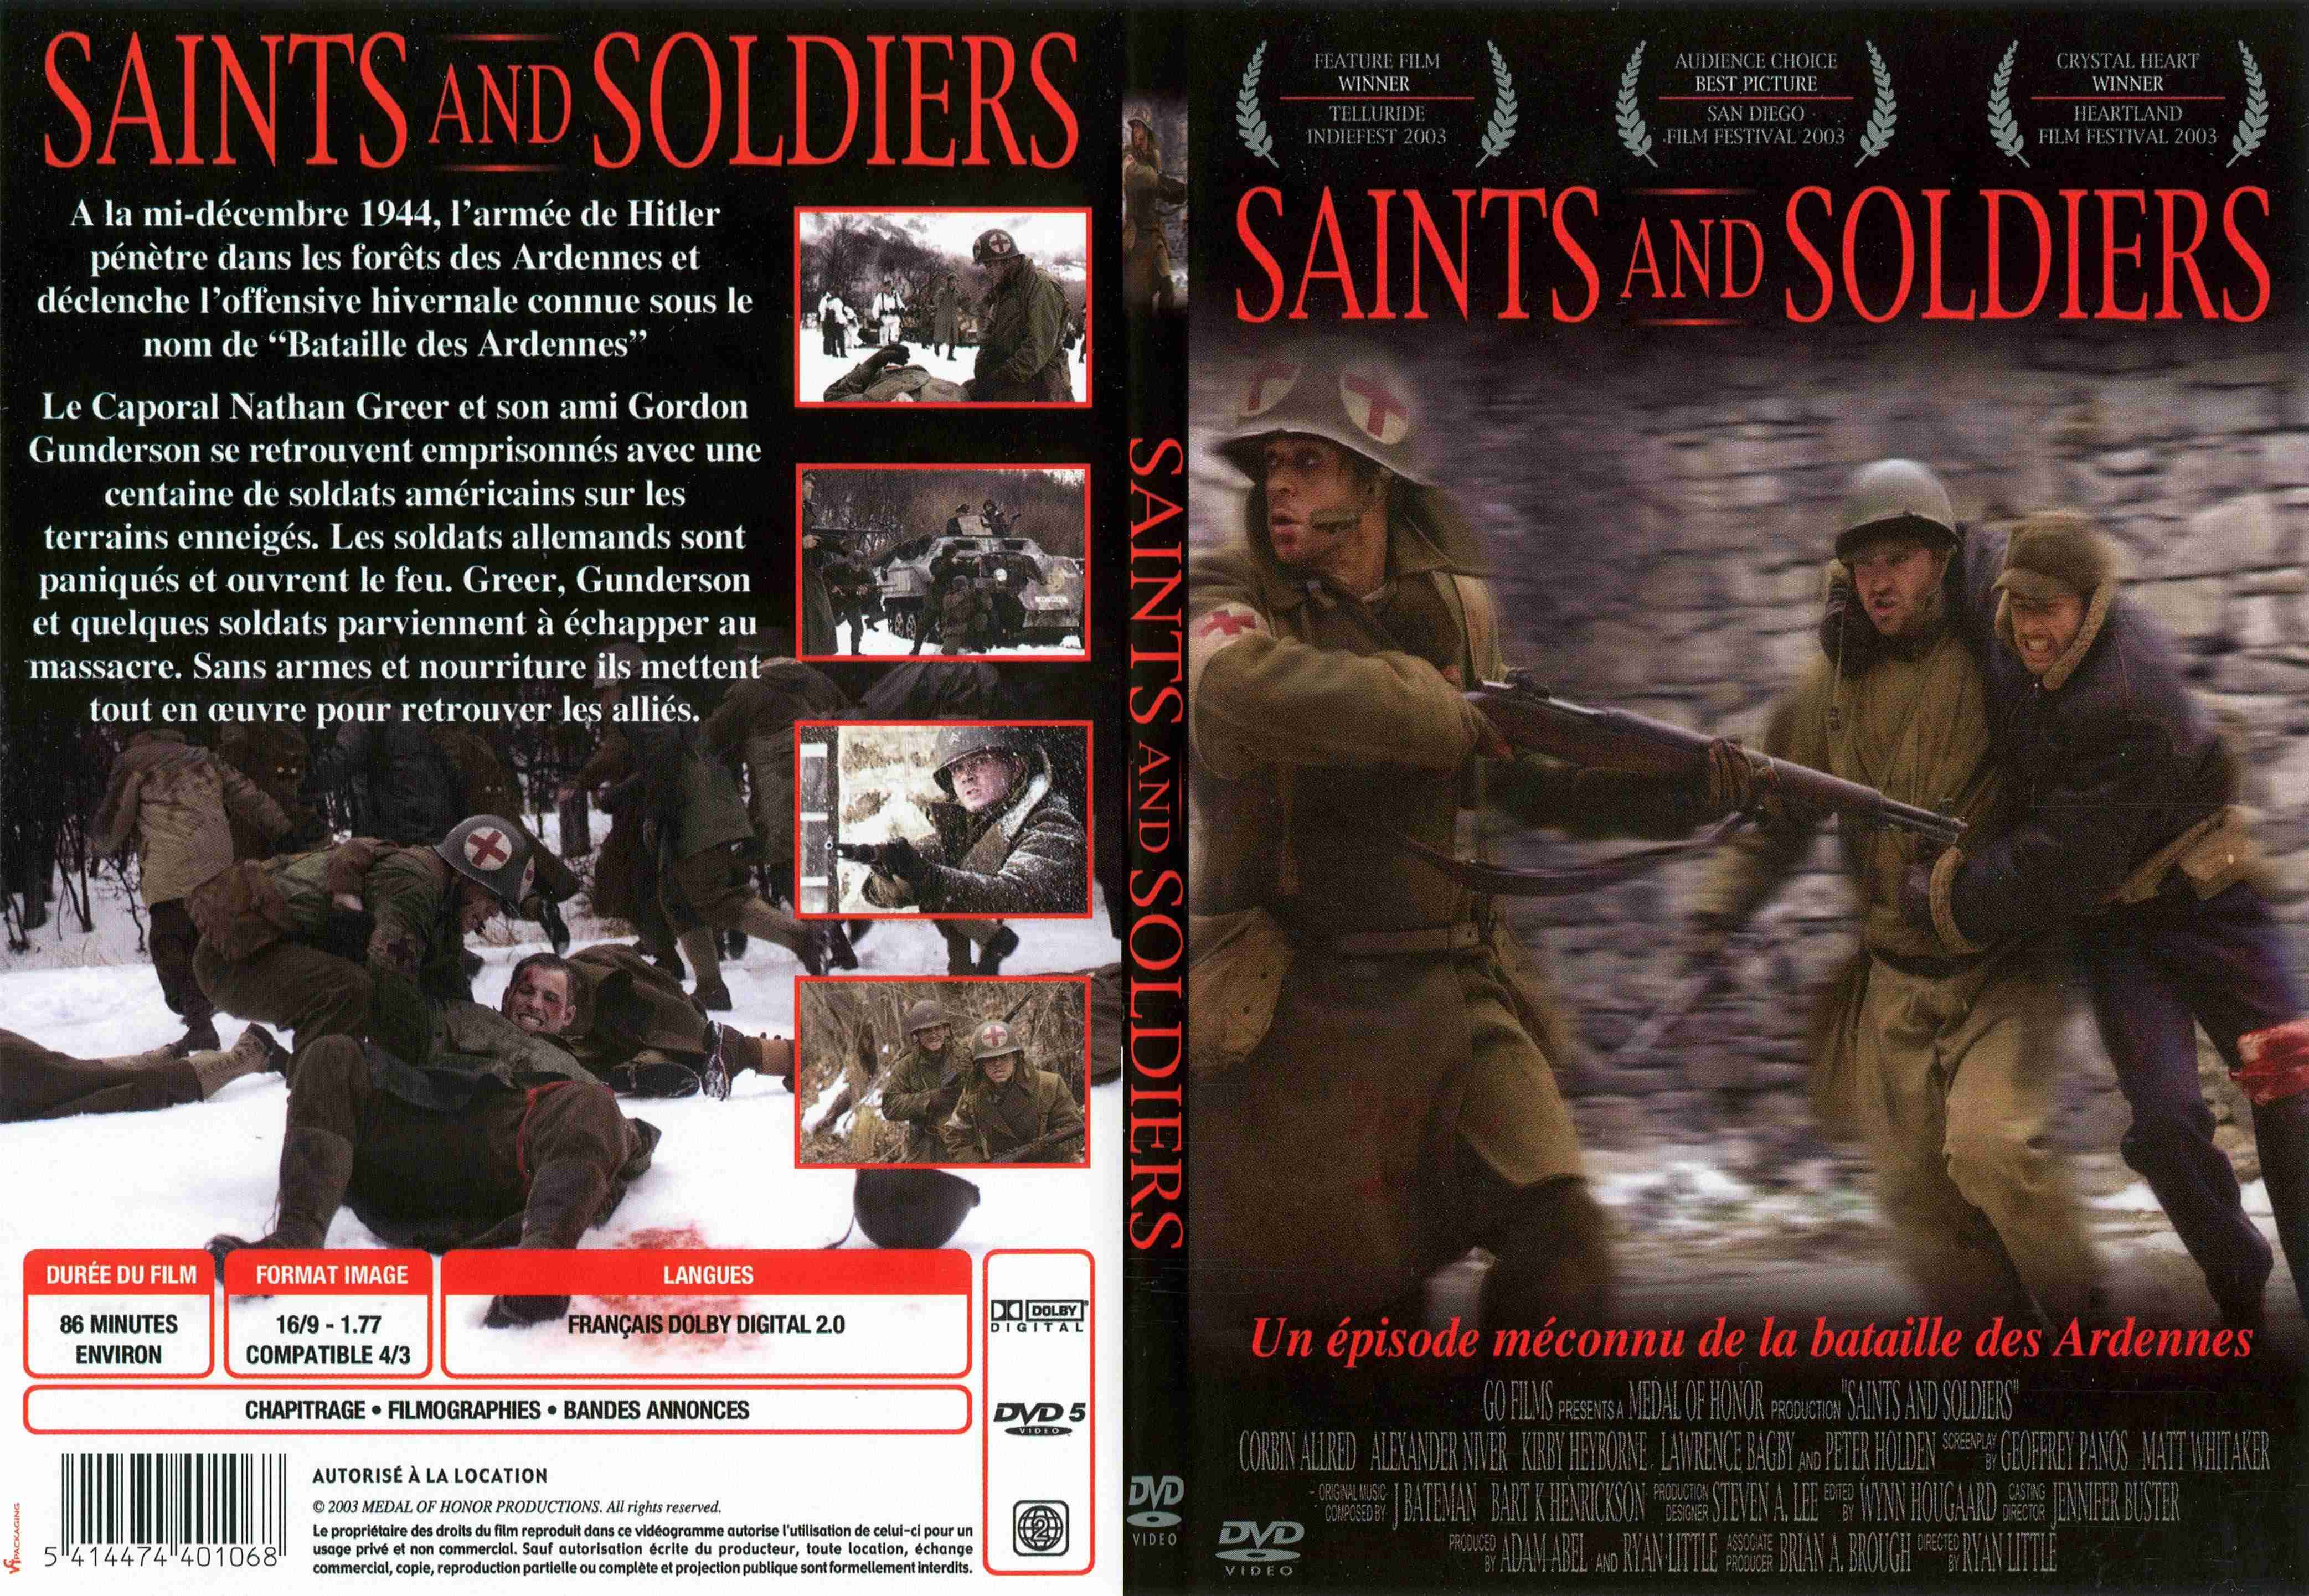 Jaquette DVD Saints and soldiers - SLIM